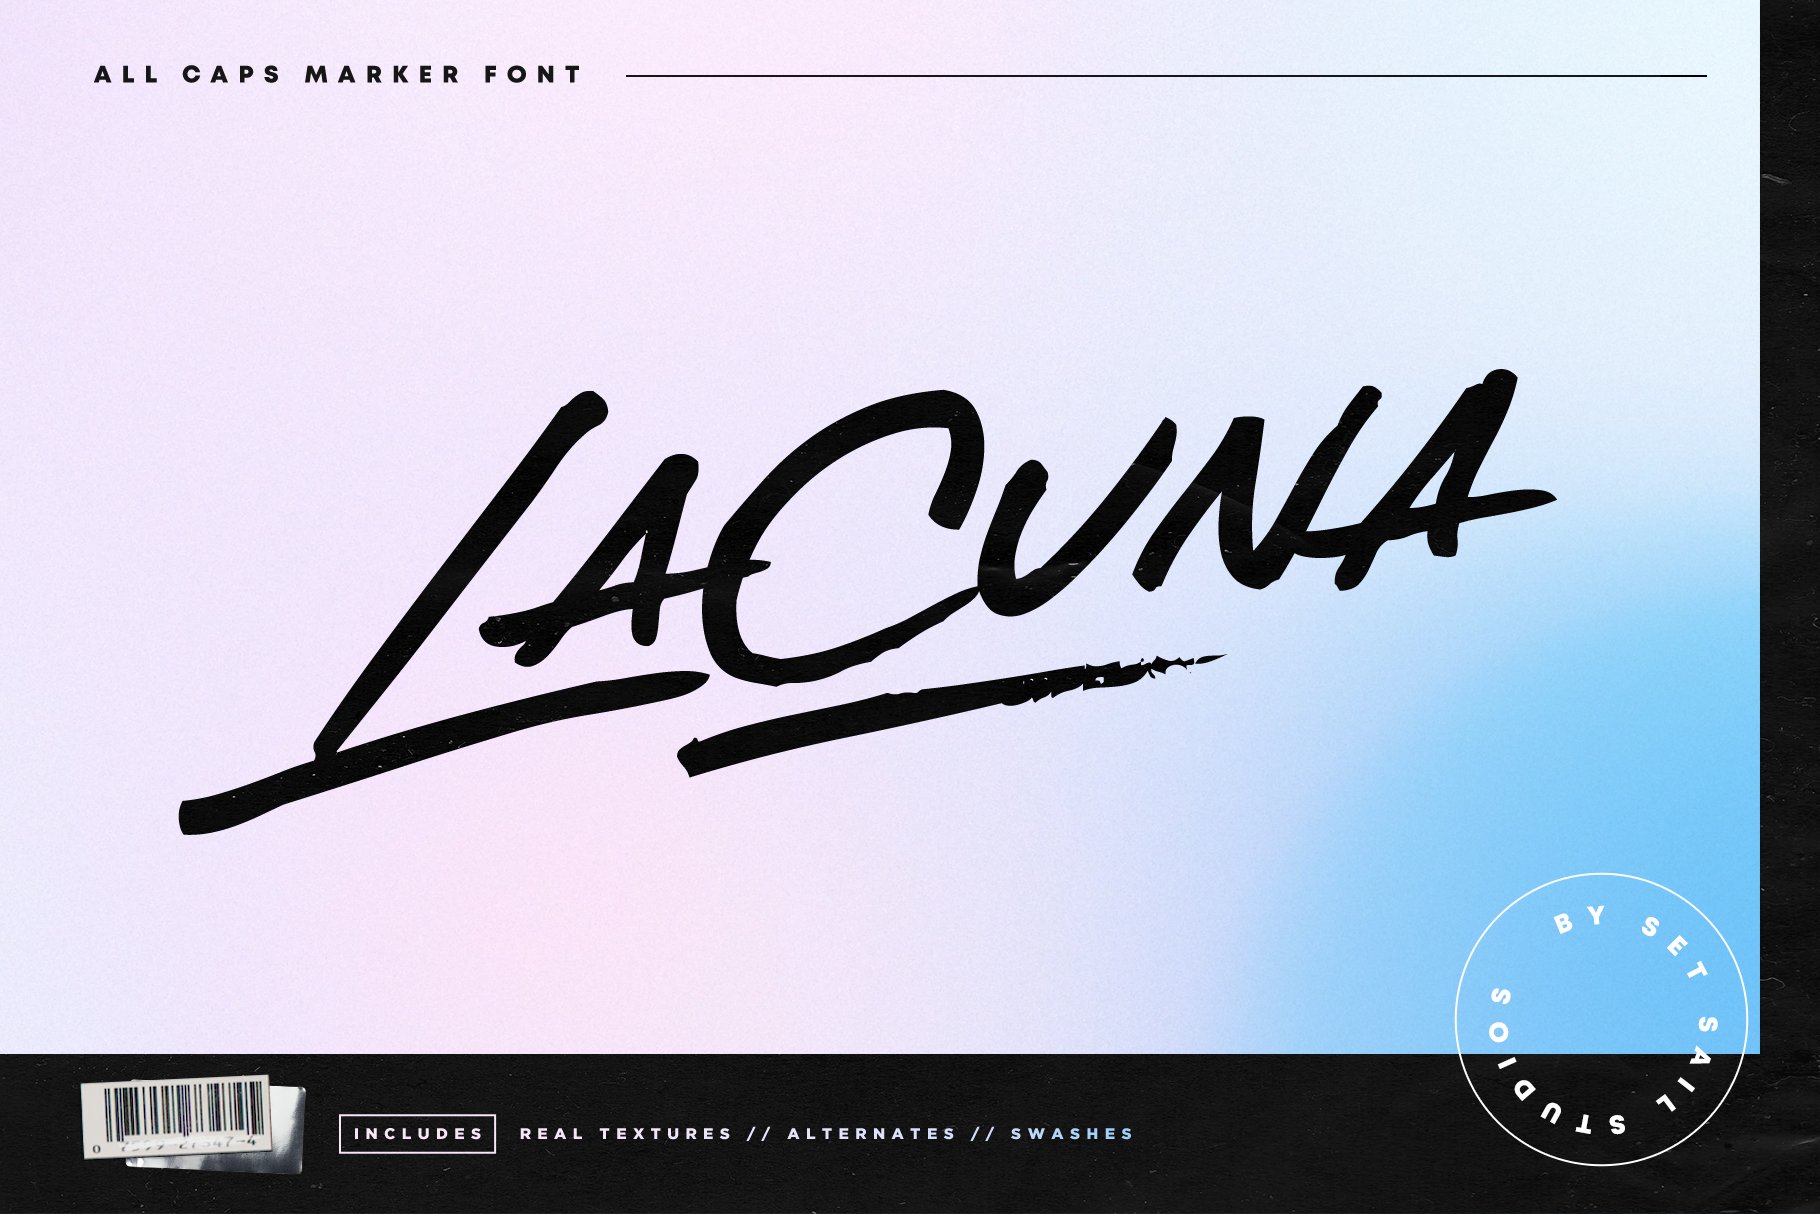 Lacuna Marker Font cover image.